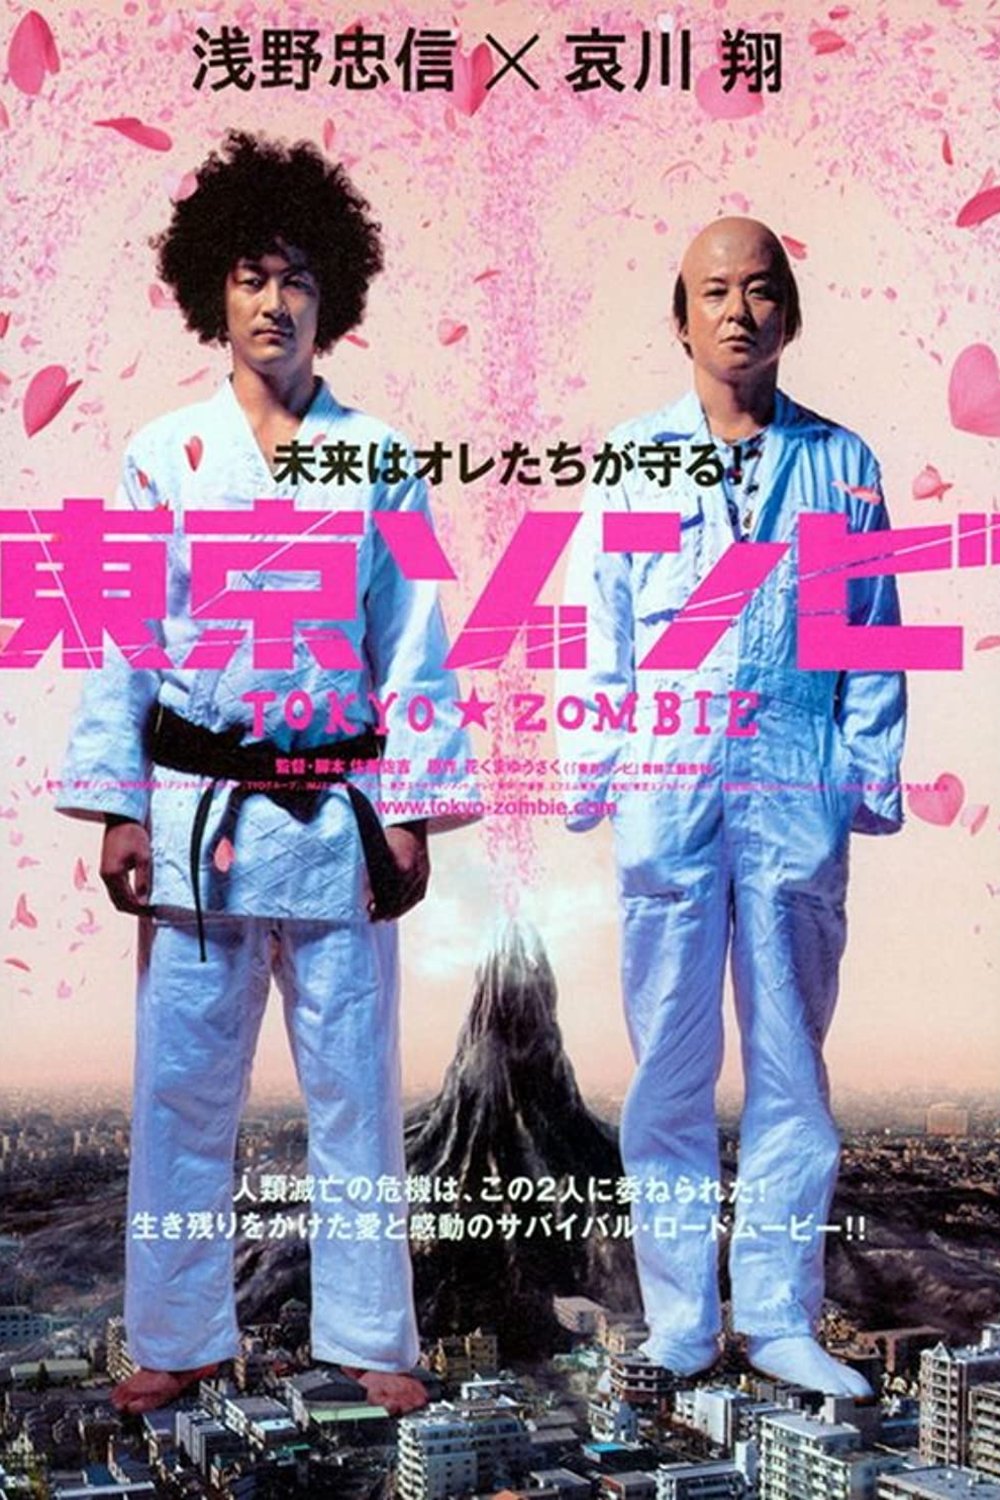 Poster of the movie Tokyo Zombie